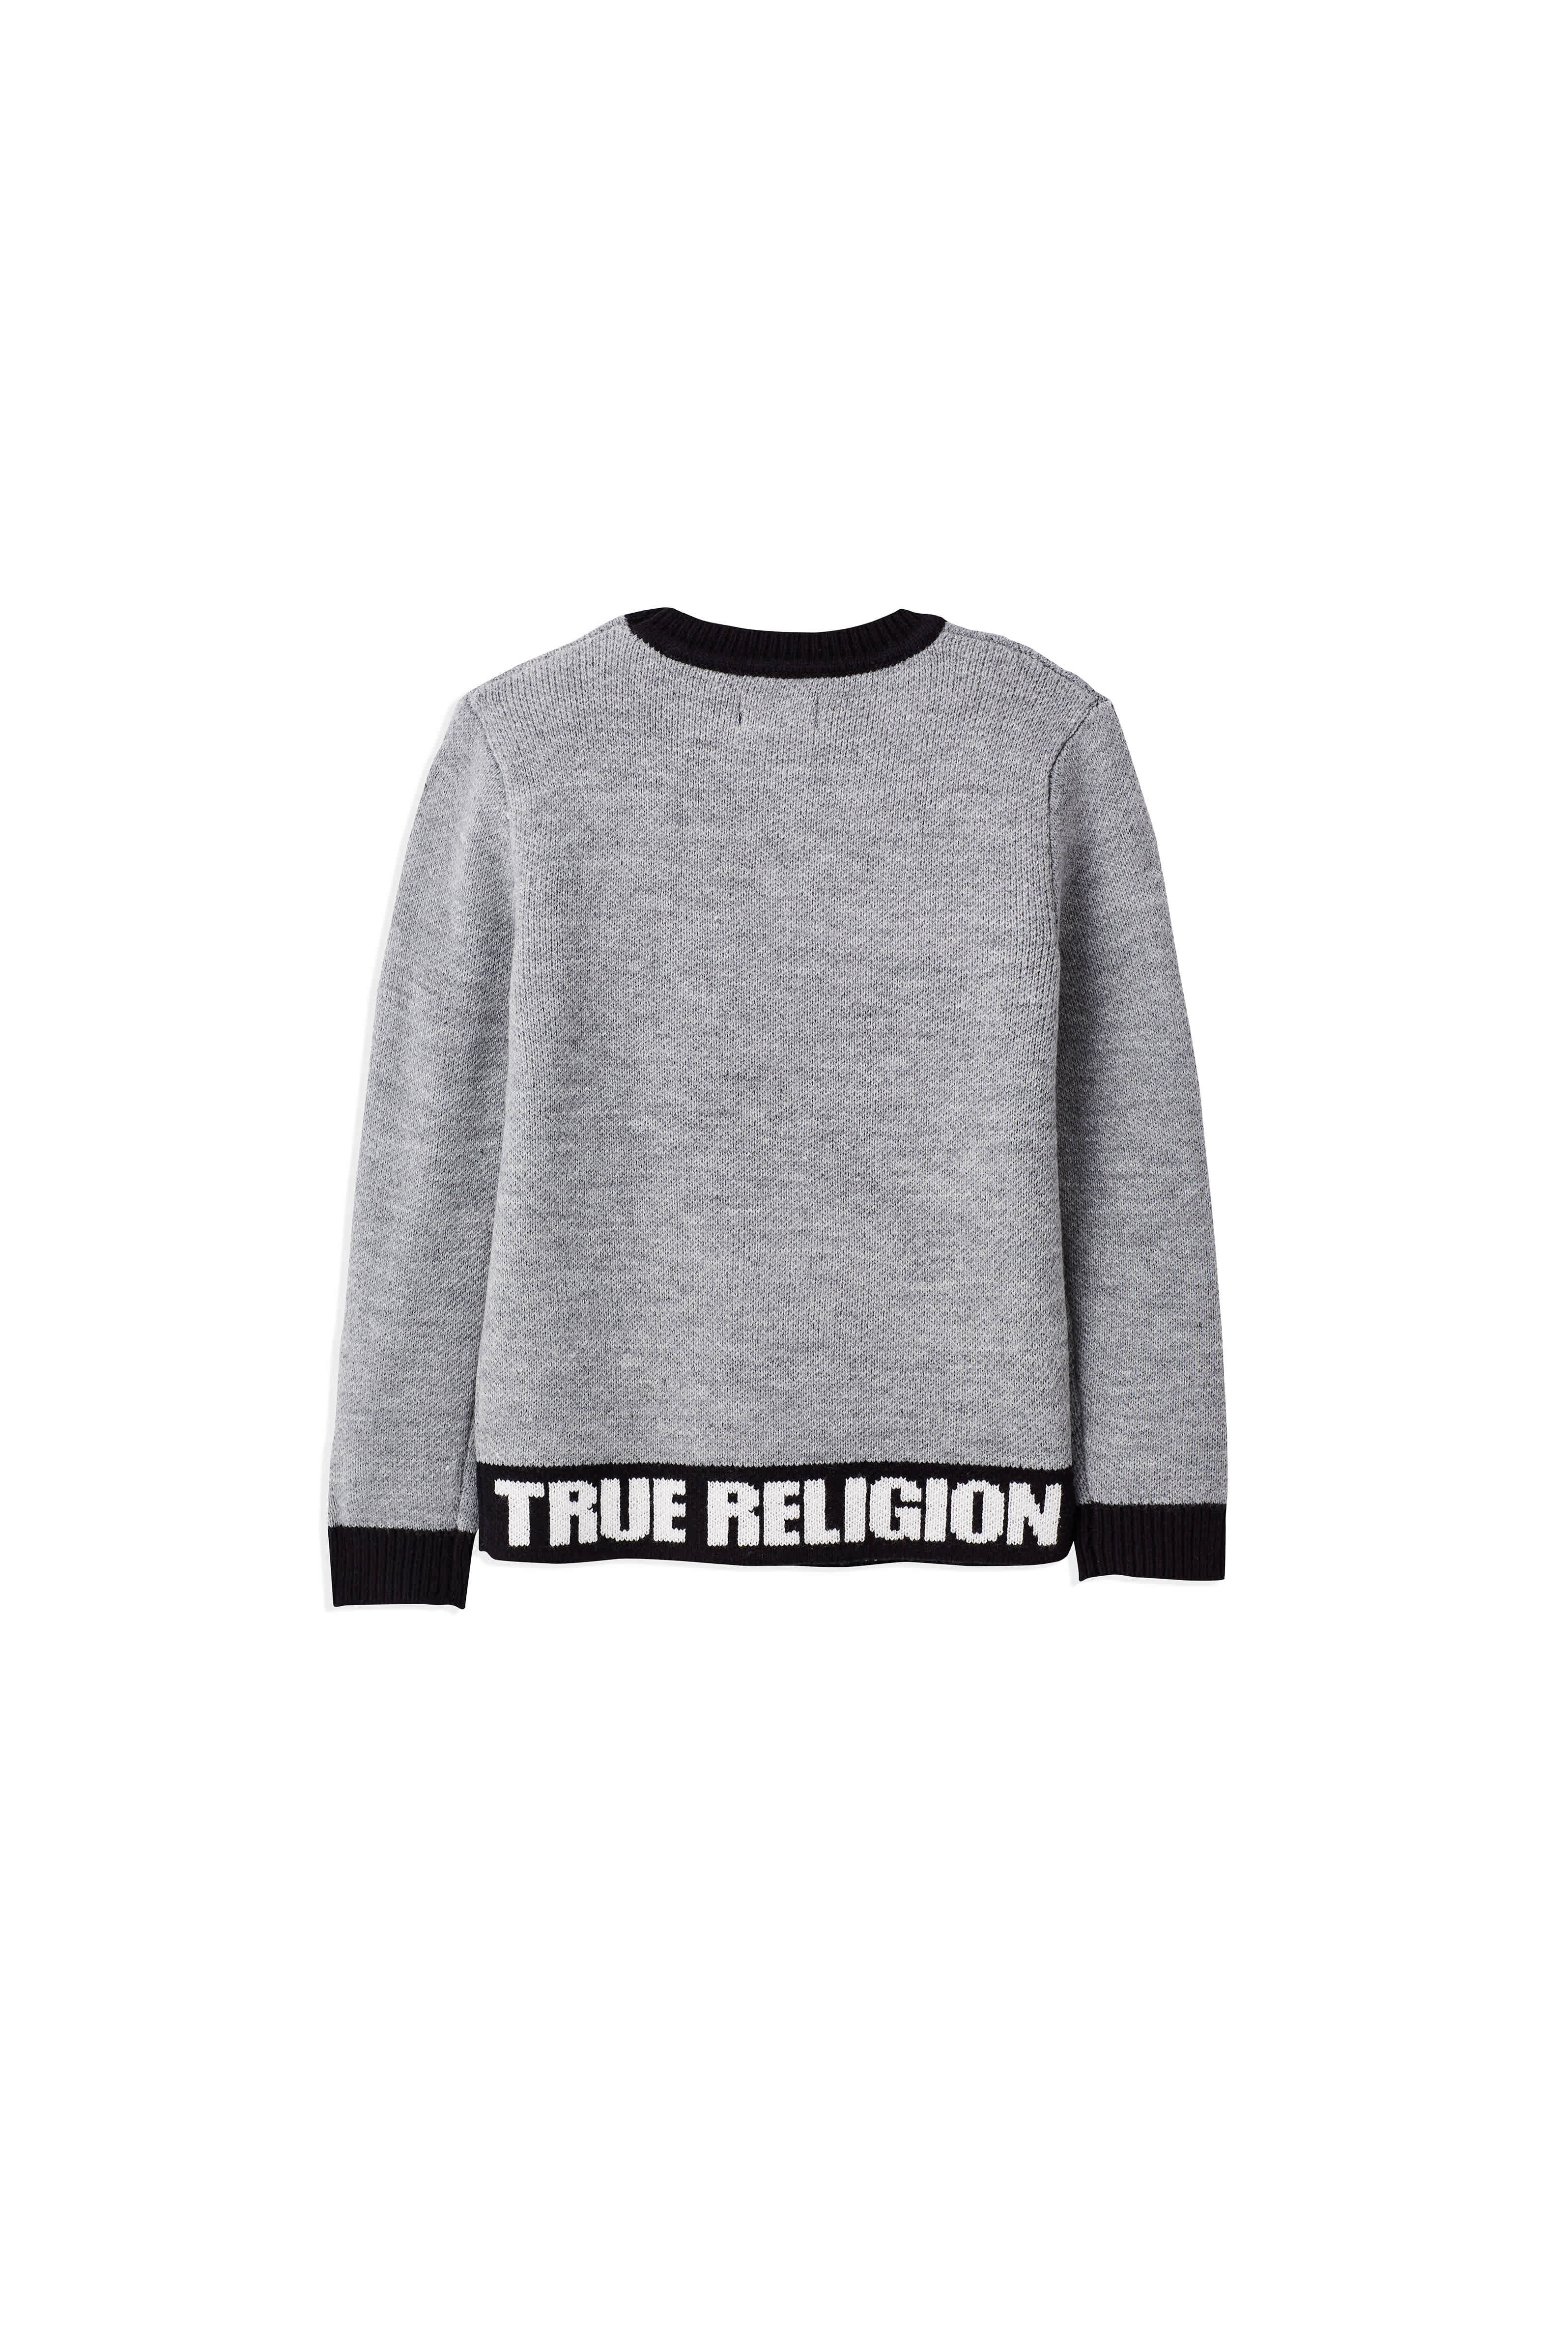 TR PULLOVER TODDLER/LITTLE KIDS SWEATER